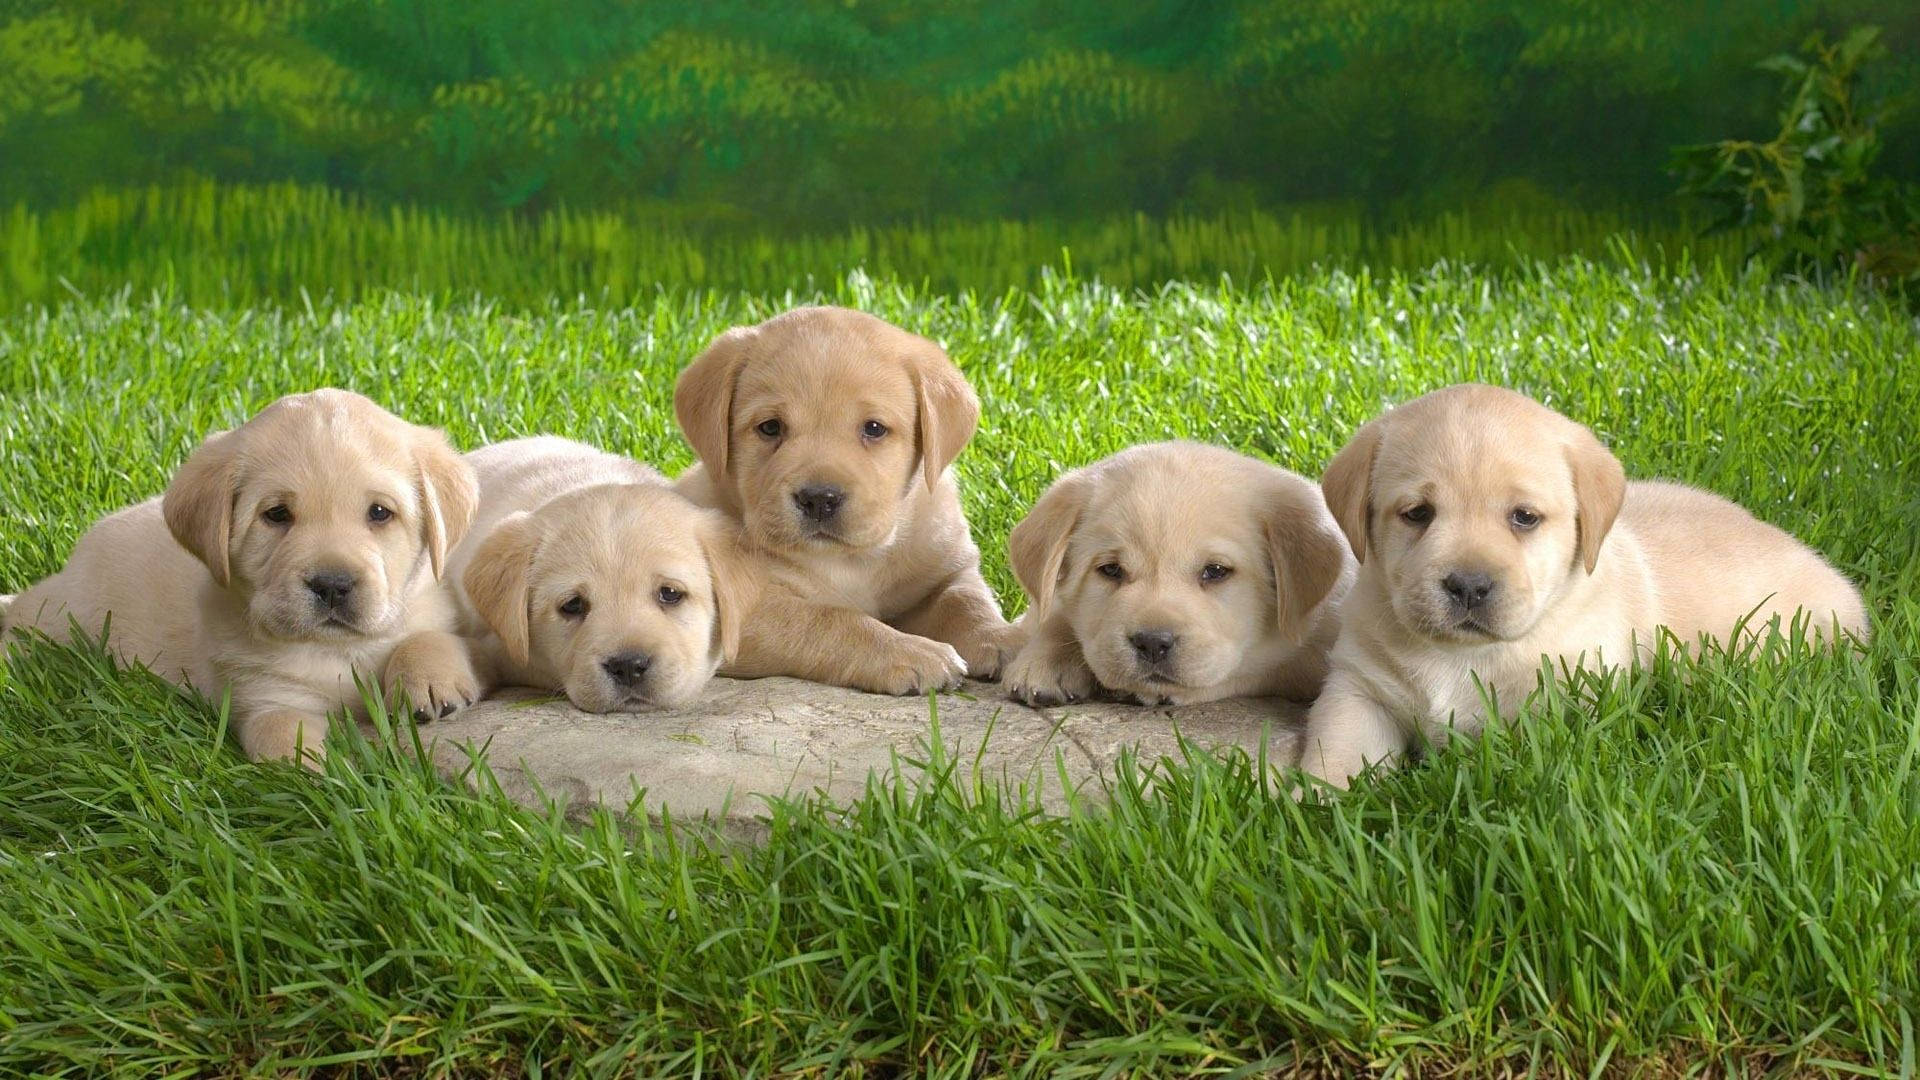 Baby Animal Puppies On The Field